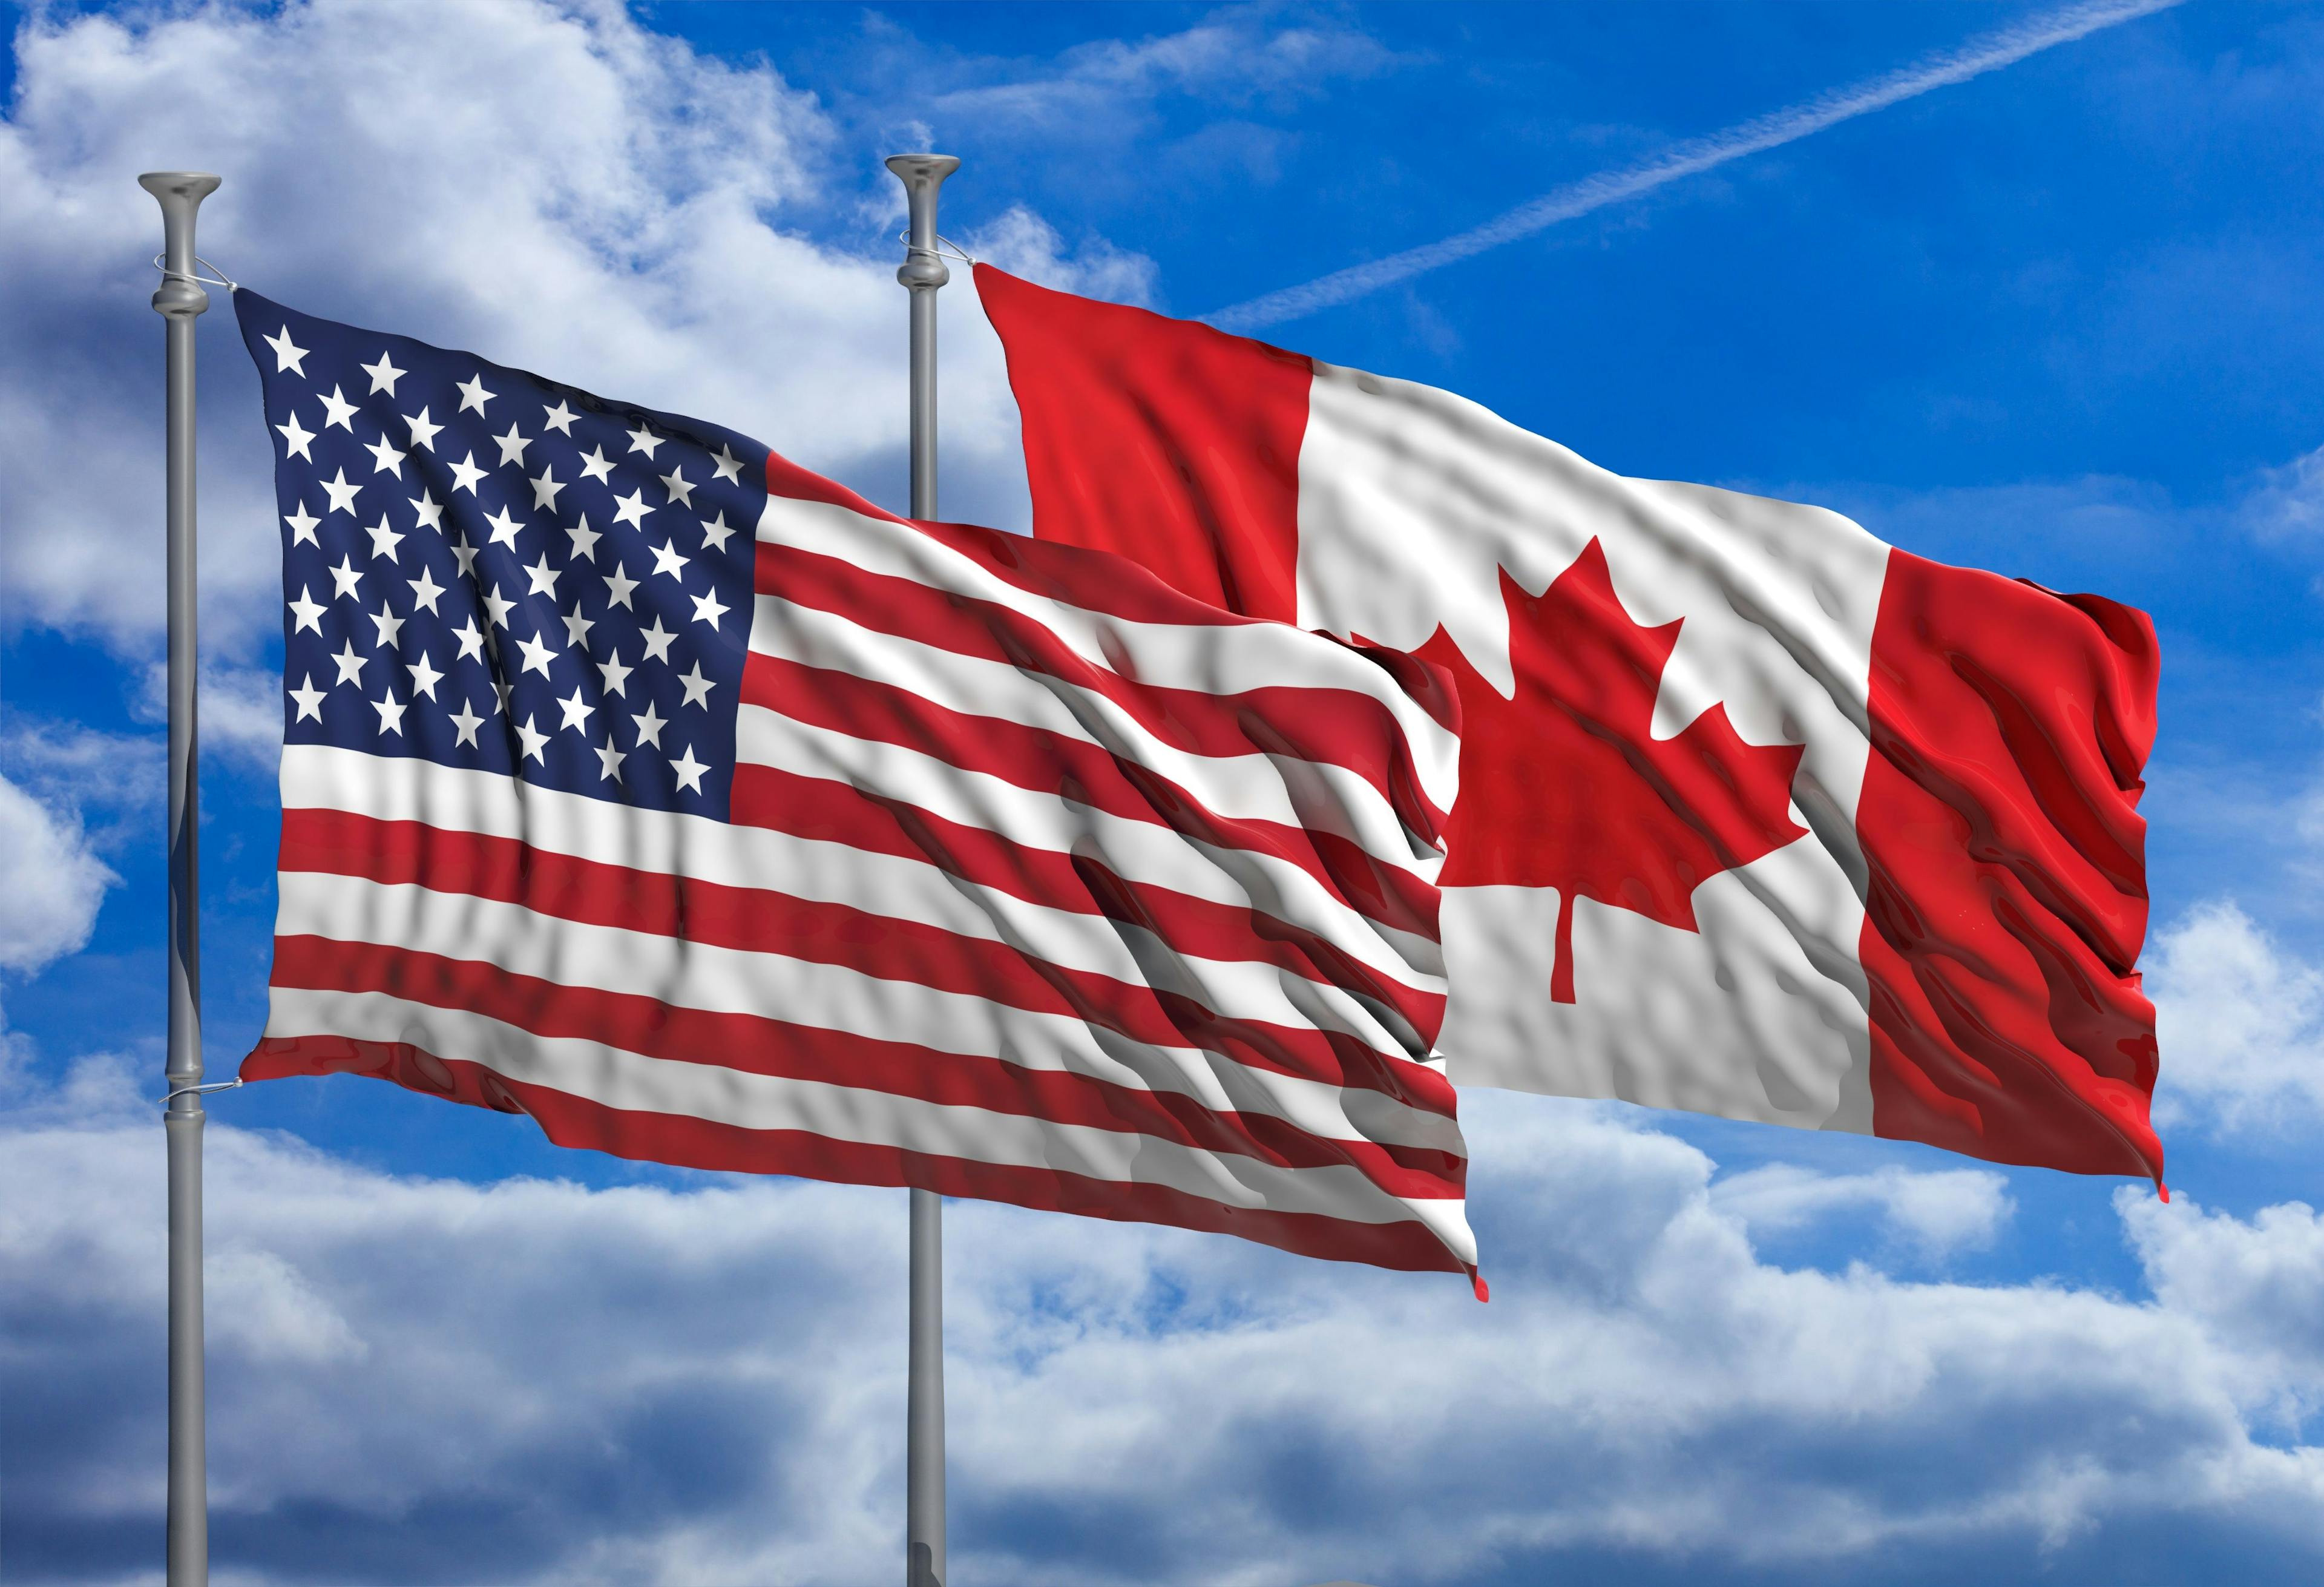 This study compares the mortality rates between Canada's public health care and the US private system, highlighting the complexities of pandemic response.